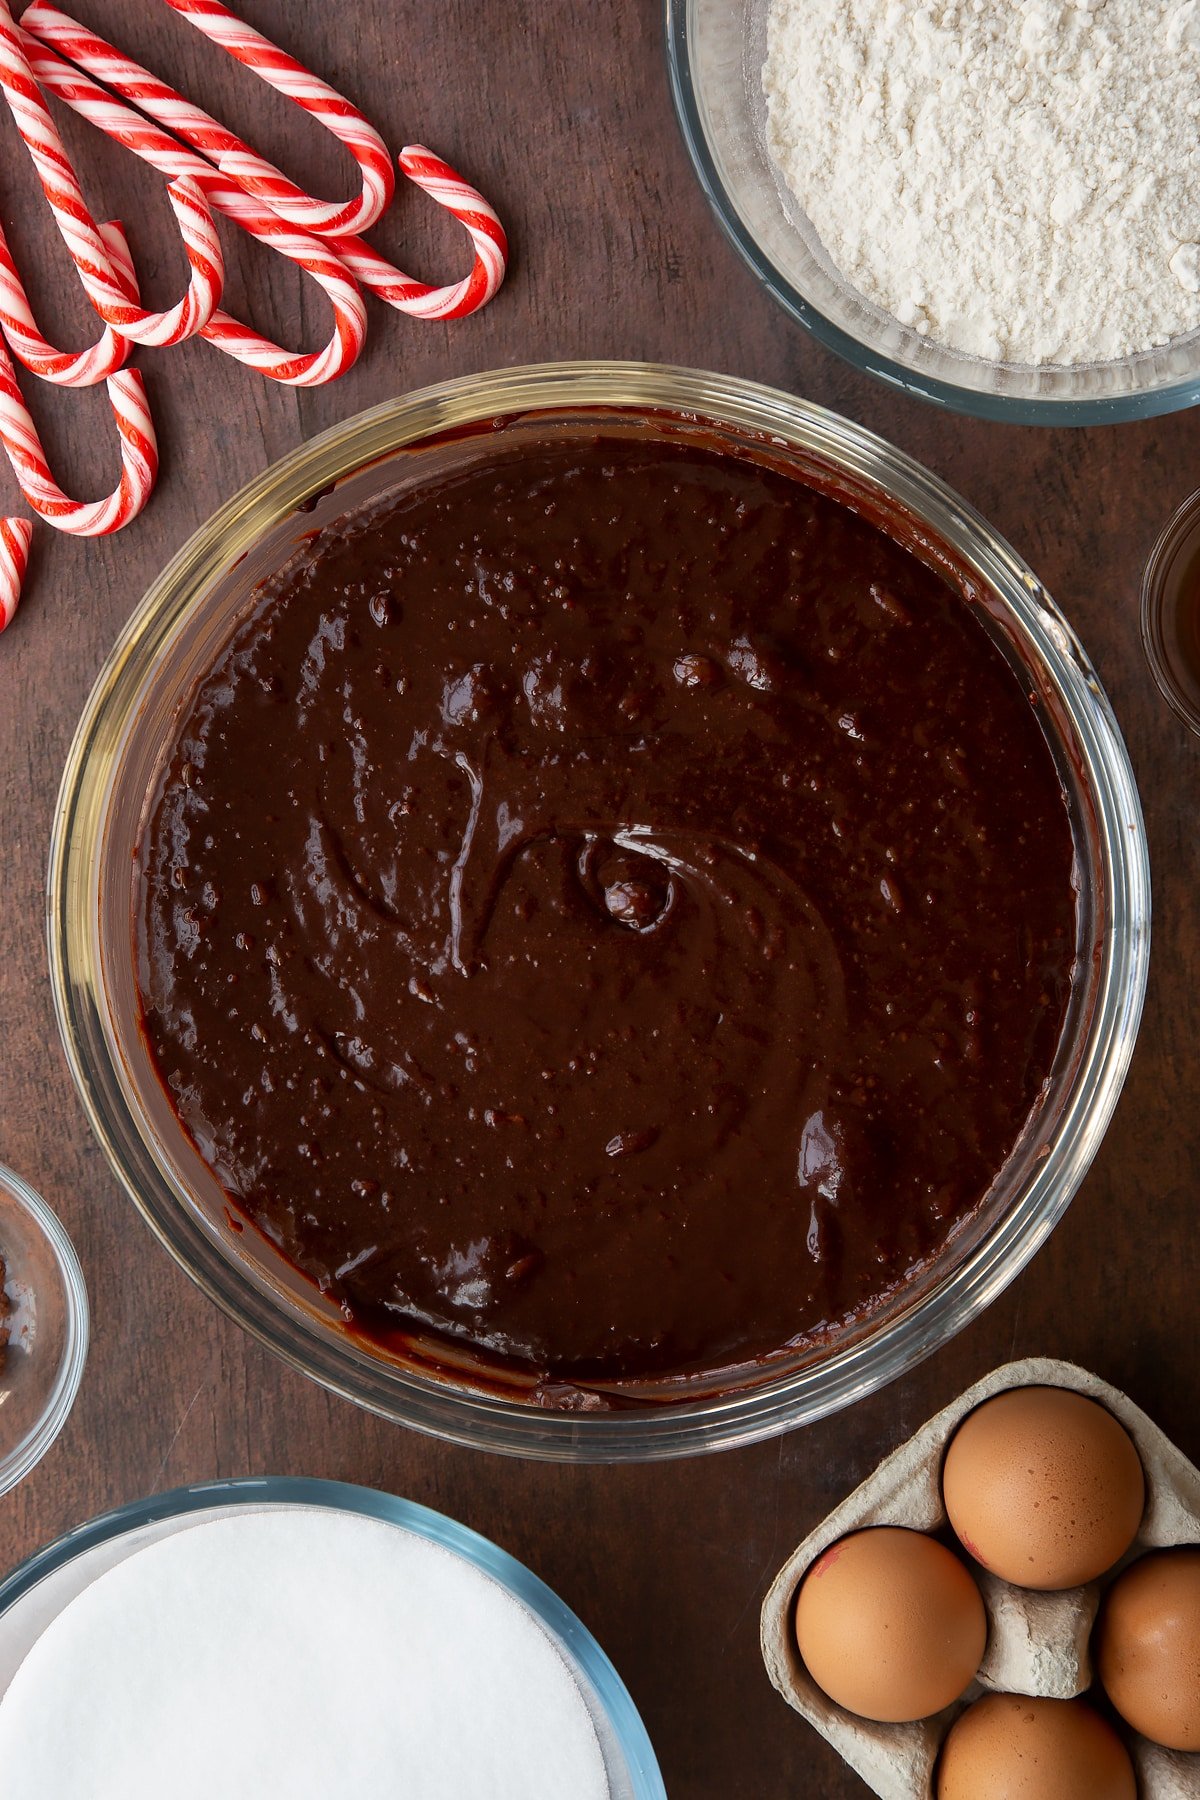 Brownie batter in a glass bowl. Ingredients to make Candy cane brownies surround the bowl.